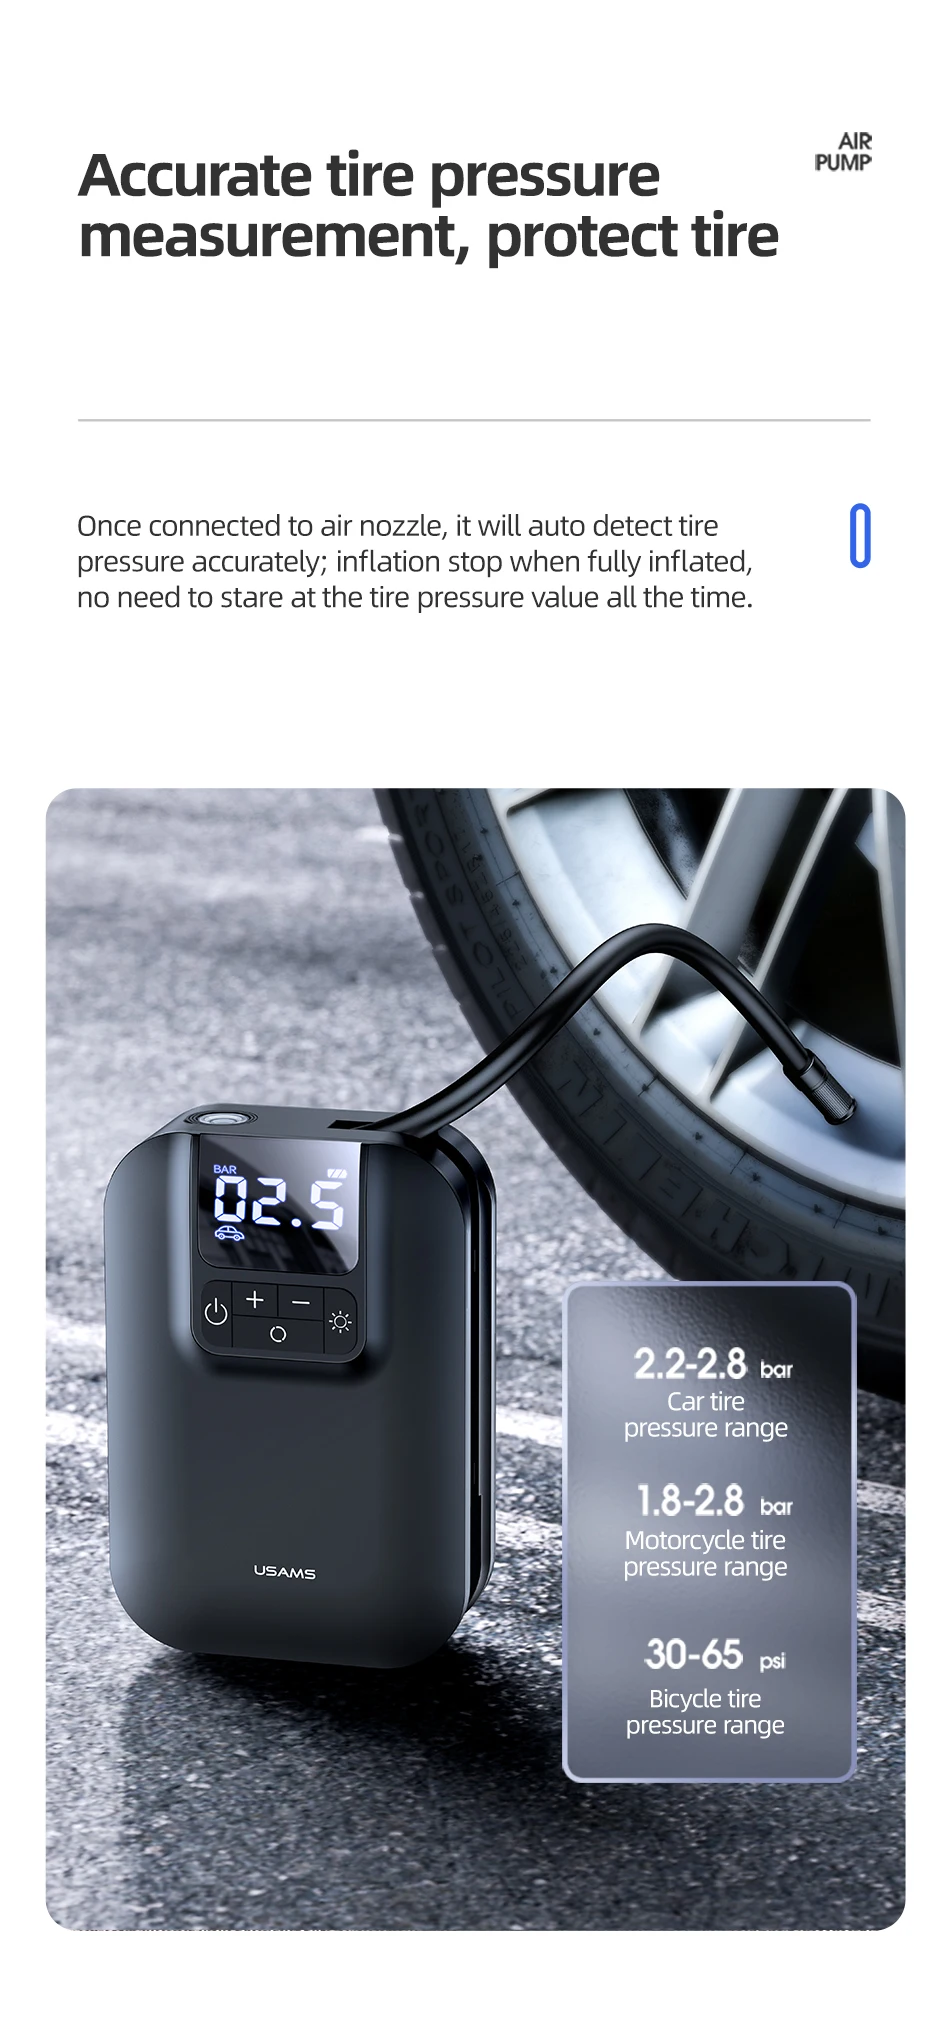 12v power bank USAMS Car Air Compressor 5000mAh Battery Digital Tire Inflator Pump Mini Inflatable Auto Tire Pump for Car Bicycle Motorcycle power bank power bank